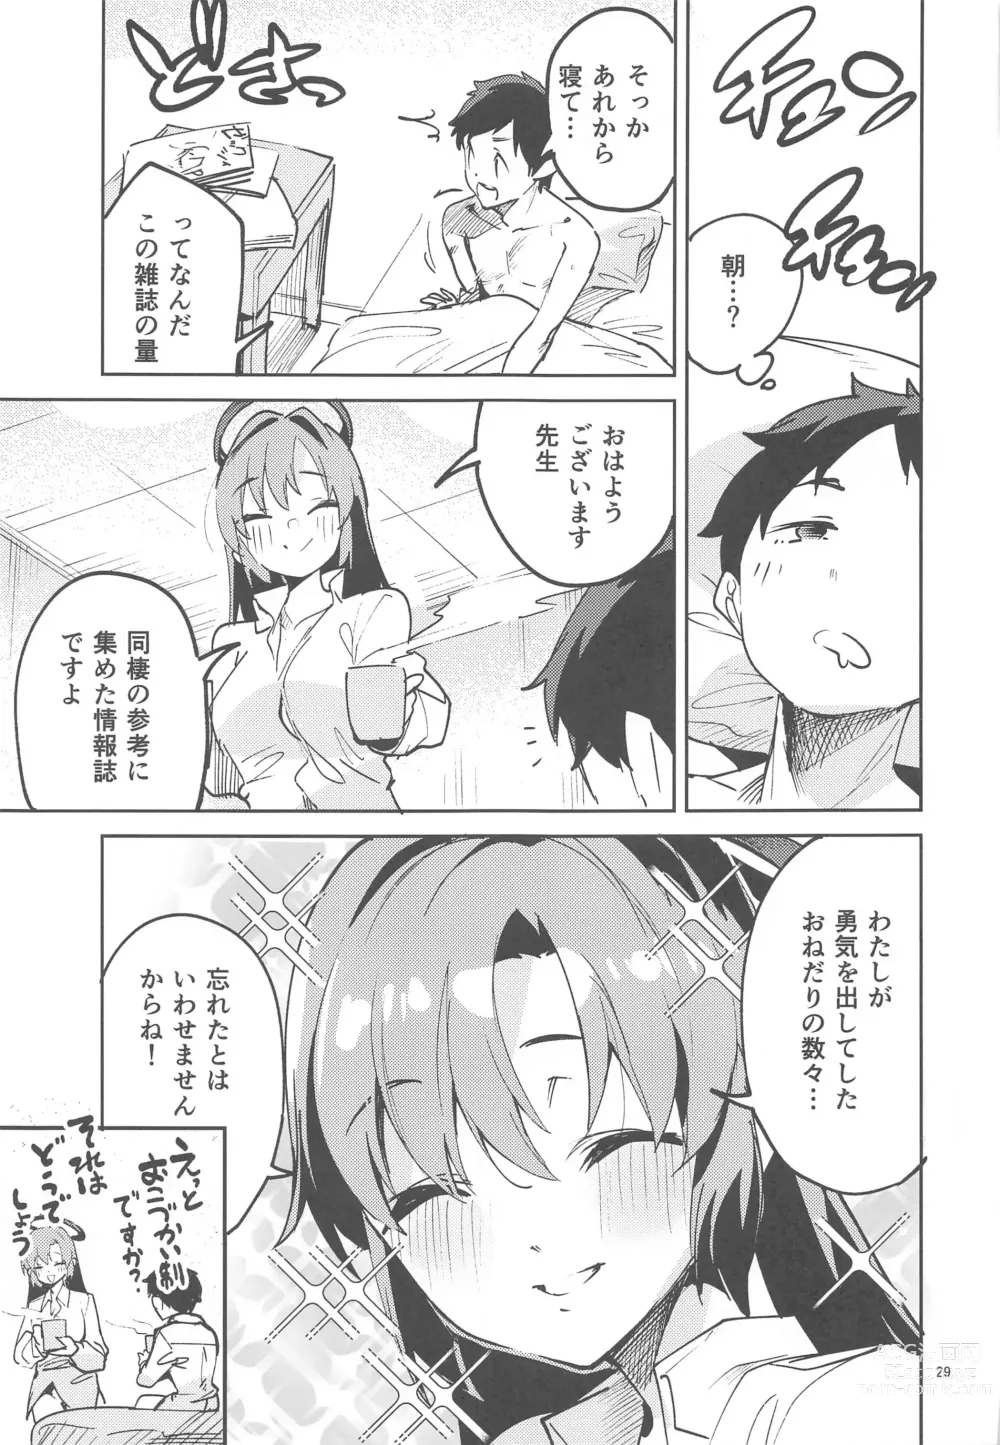 Page 28 of doujinshi Yakusoku ga Ooi Seito - A Student with many commitments